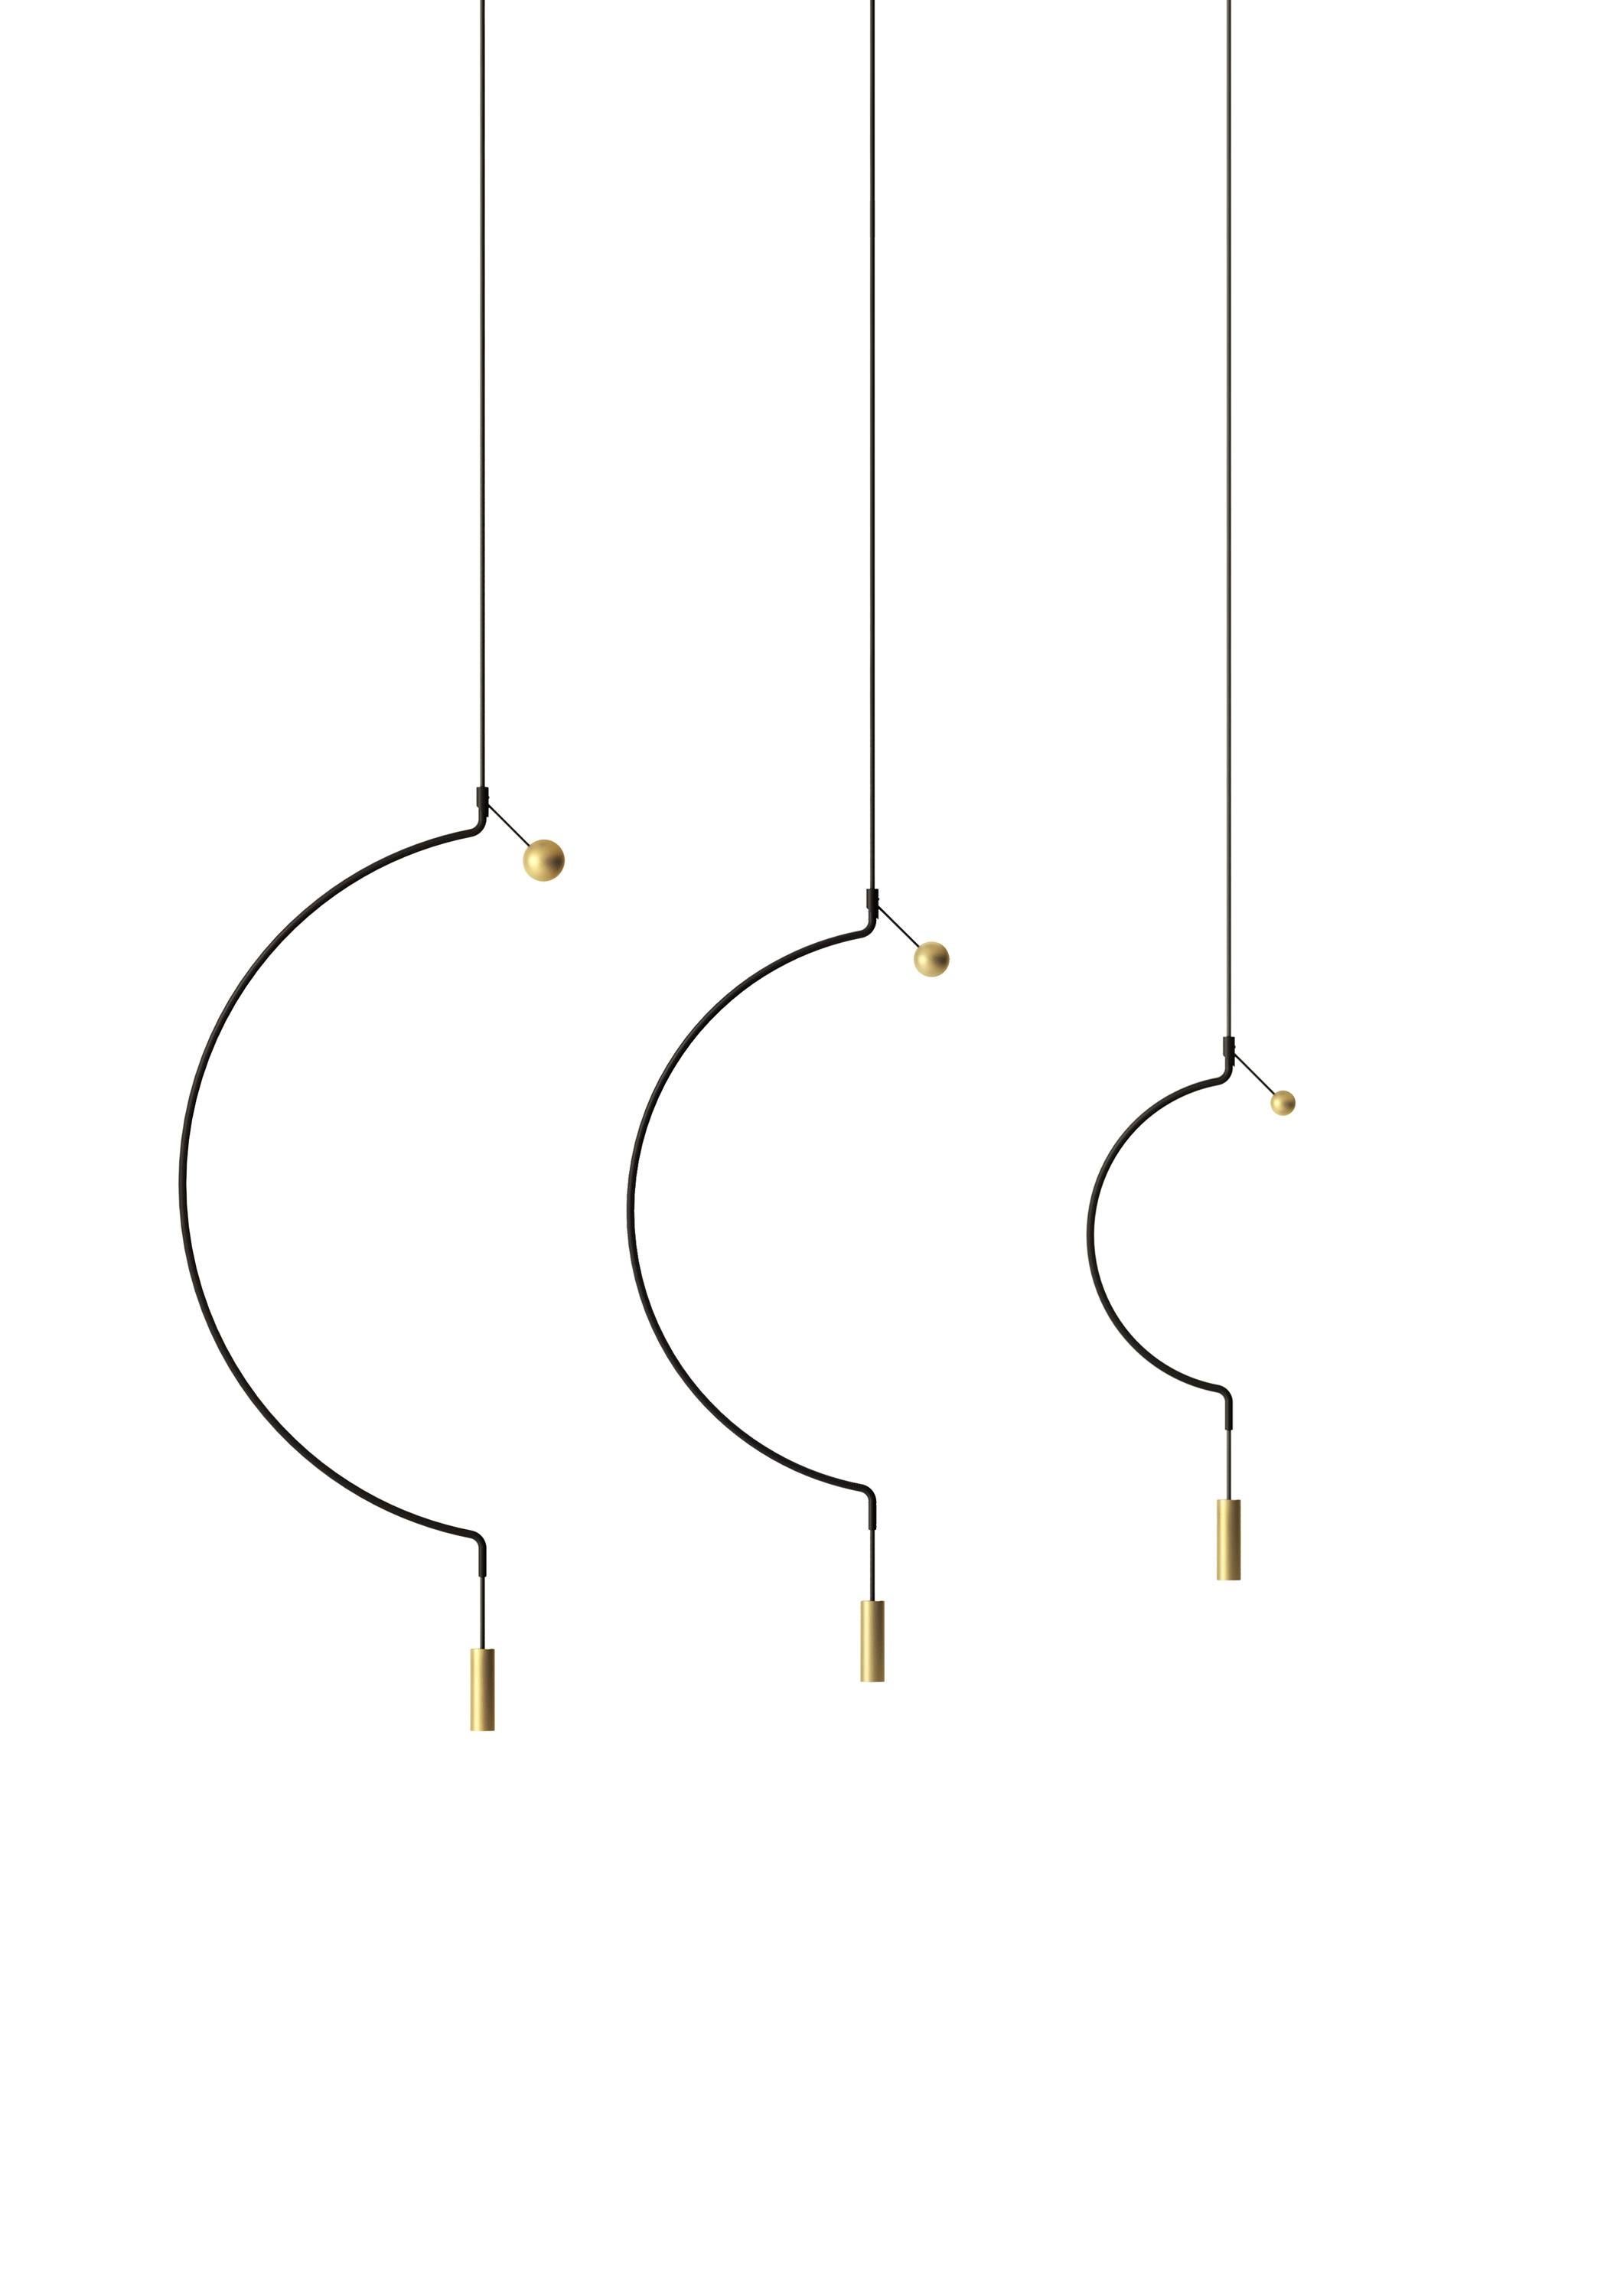 Axolight Liaison Model M1 Pendant Lamp in Black/Gold by Sara Moroni

Modular lightness and elegance. Liaison tells about the perfect balance of three geometric archetypes: sphere, circle and cylinder compose a system that includes the single pendant